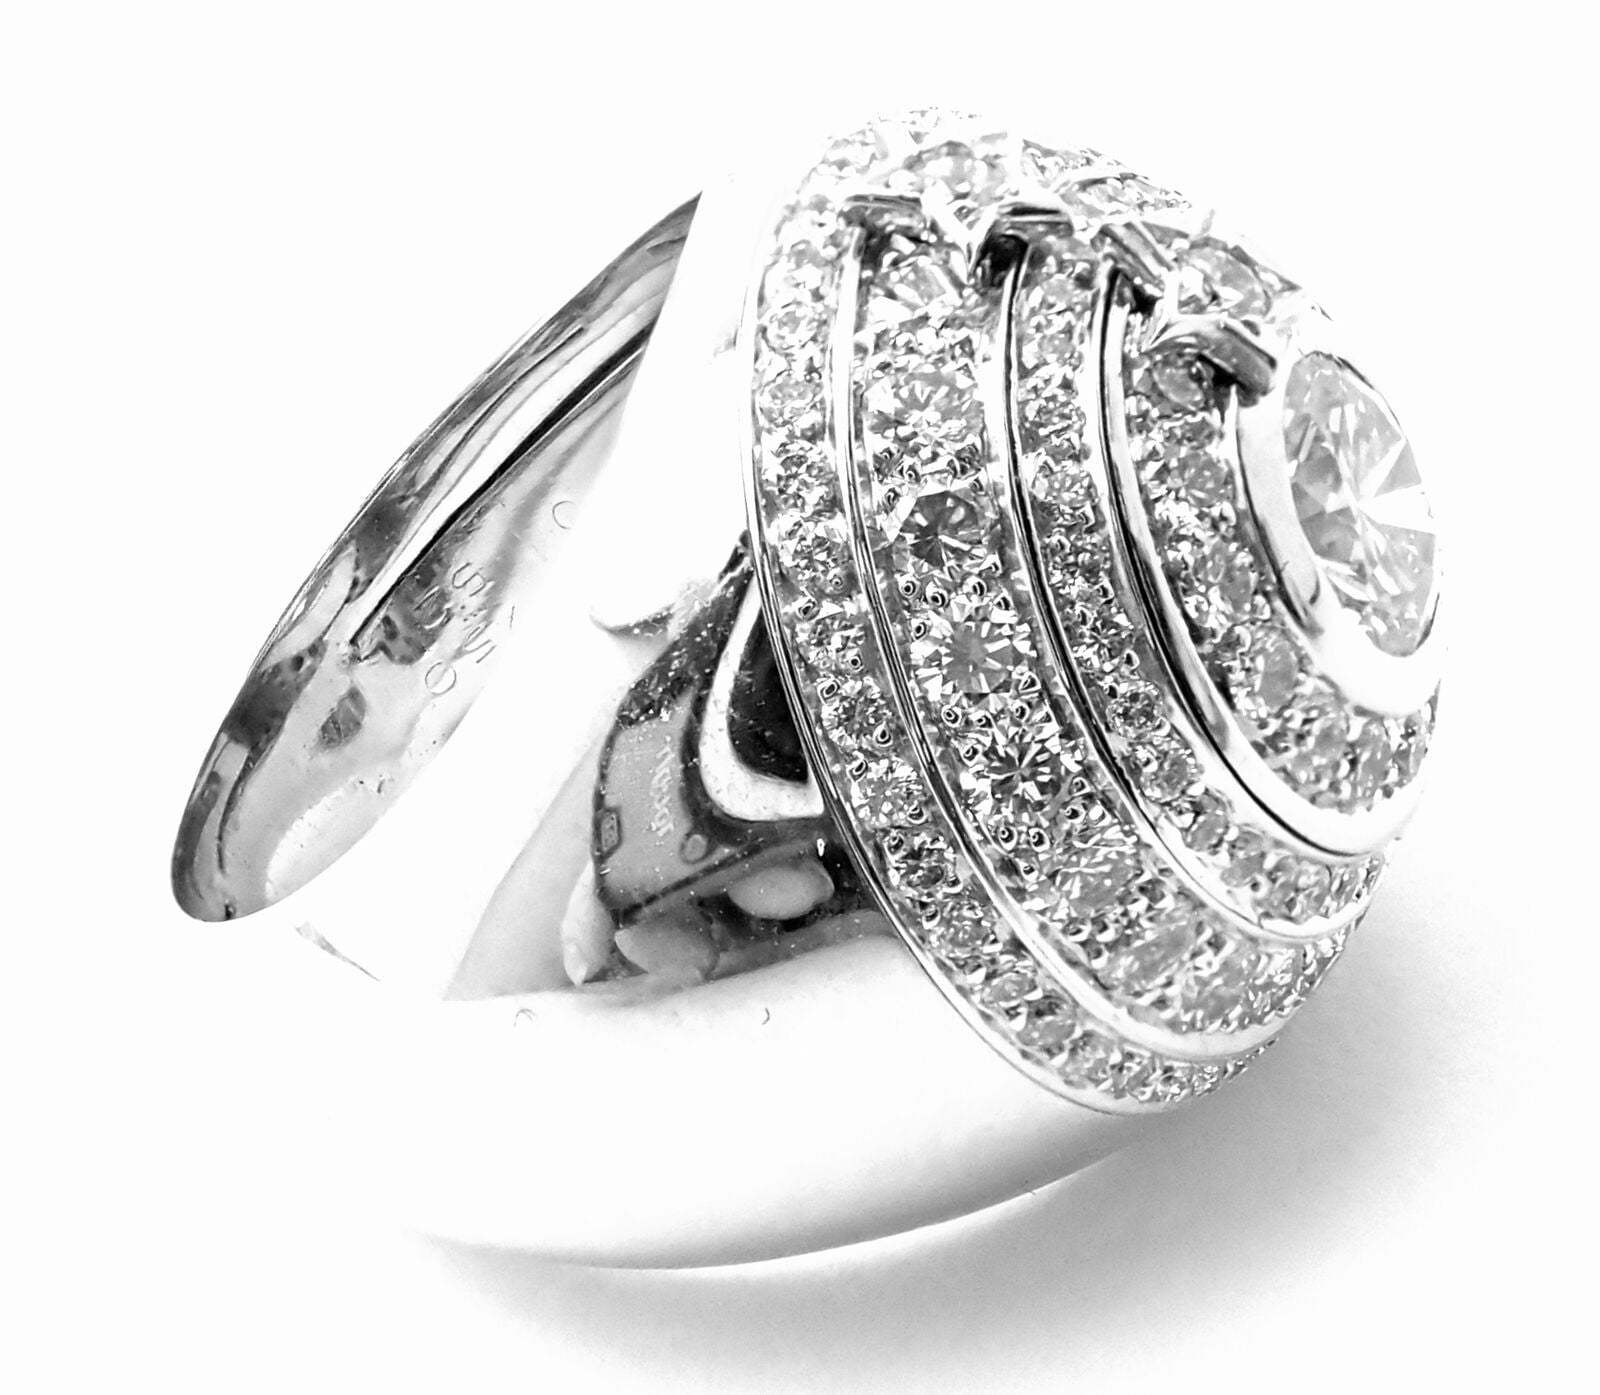 CHANEL Jewelry & Watches:Fine Jewelry:Rings Authentic! Chanel Comete Star 18k White Gold Diamond Large Spinning Dome Ring